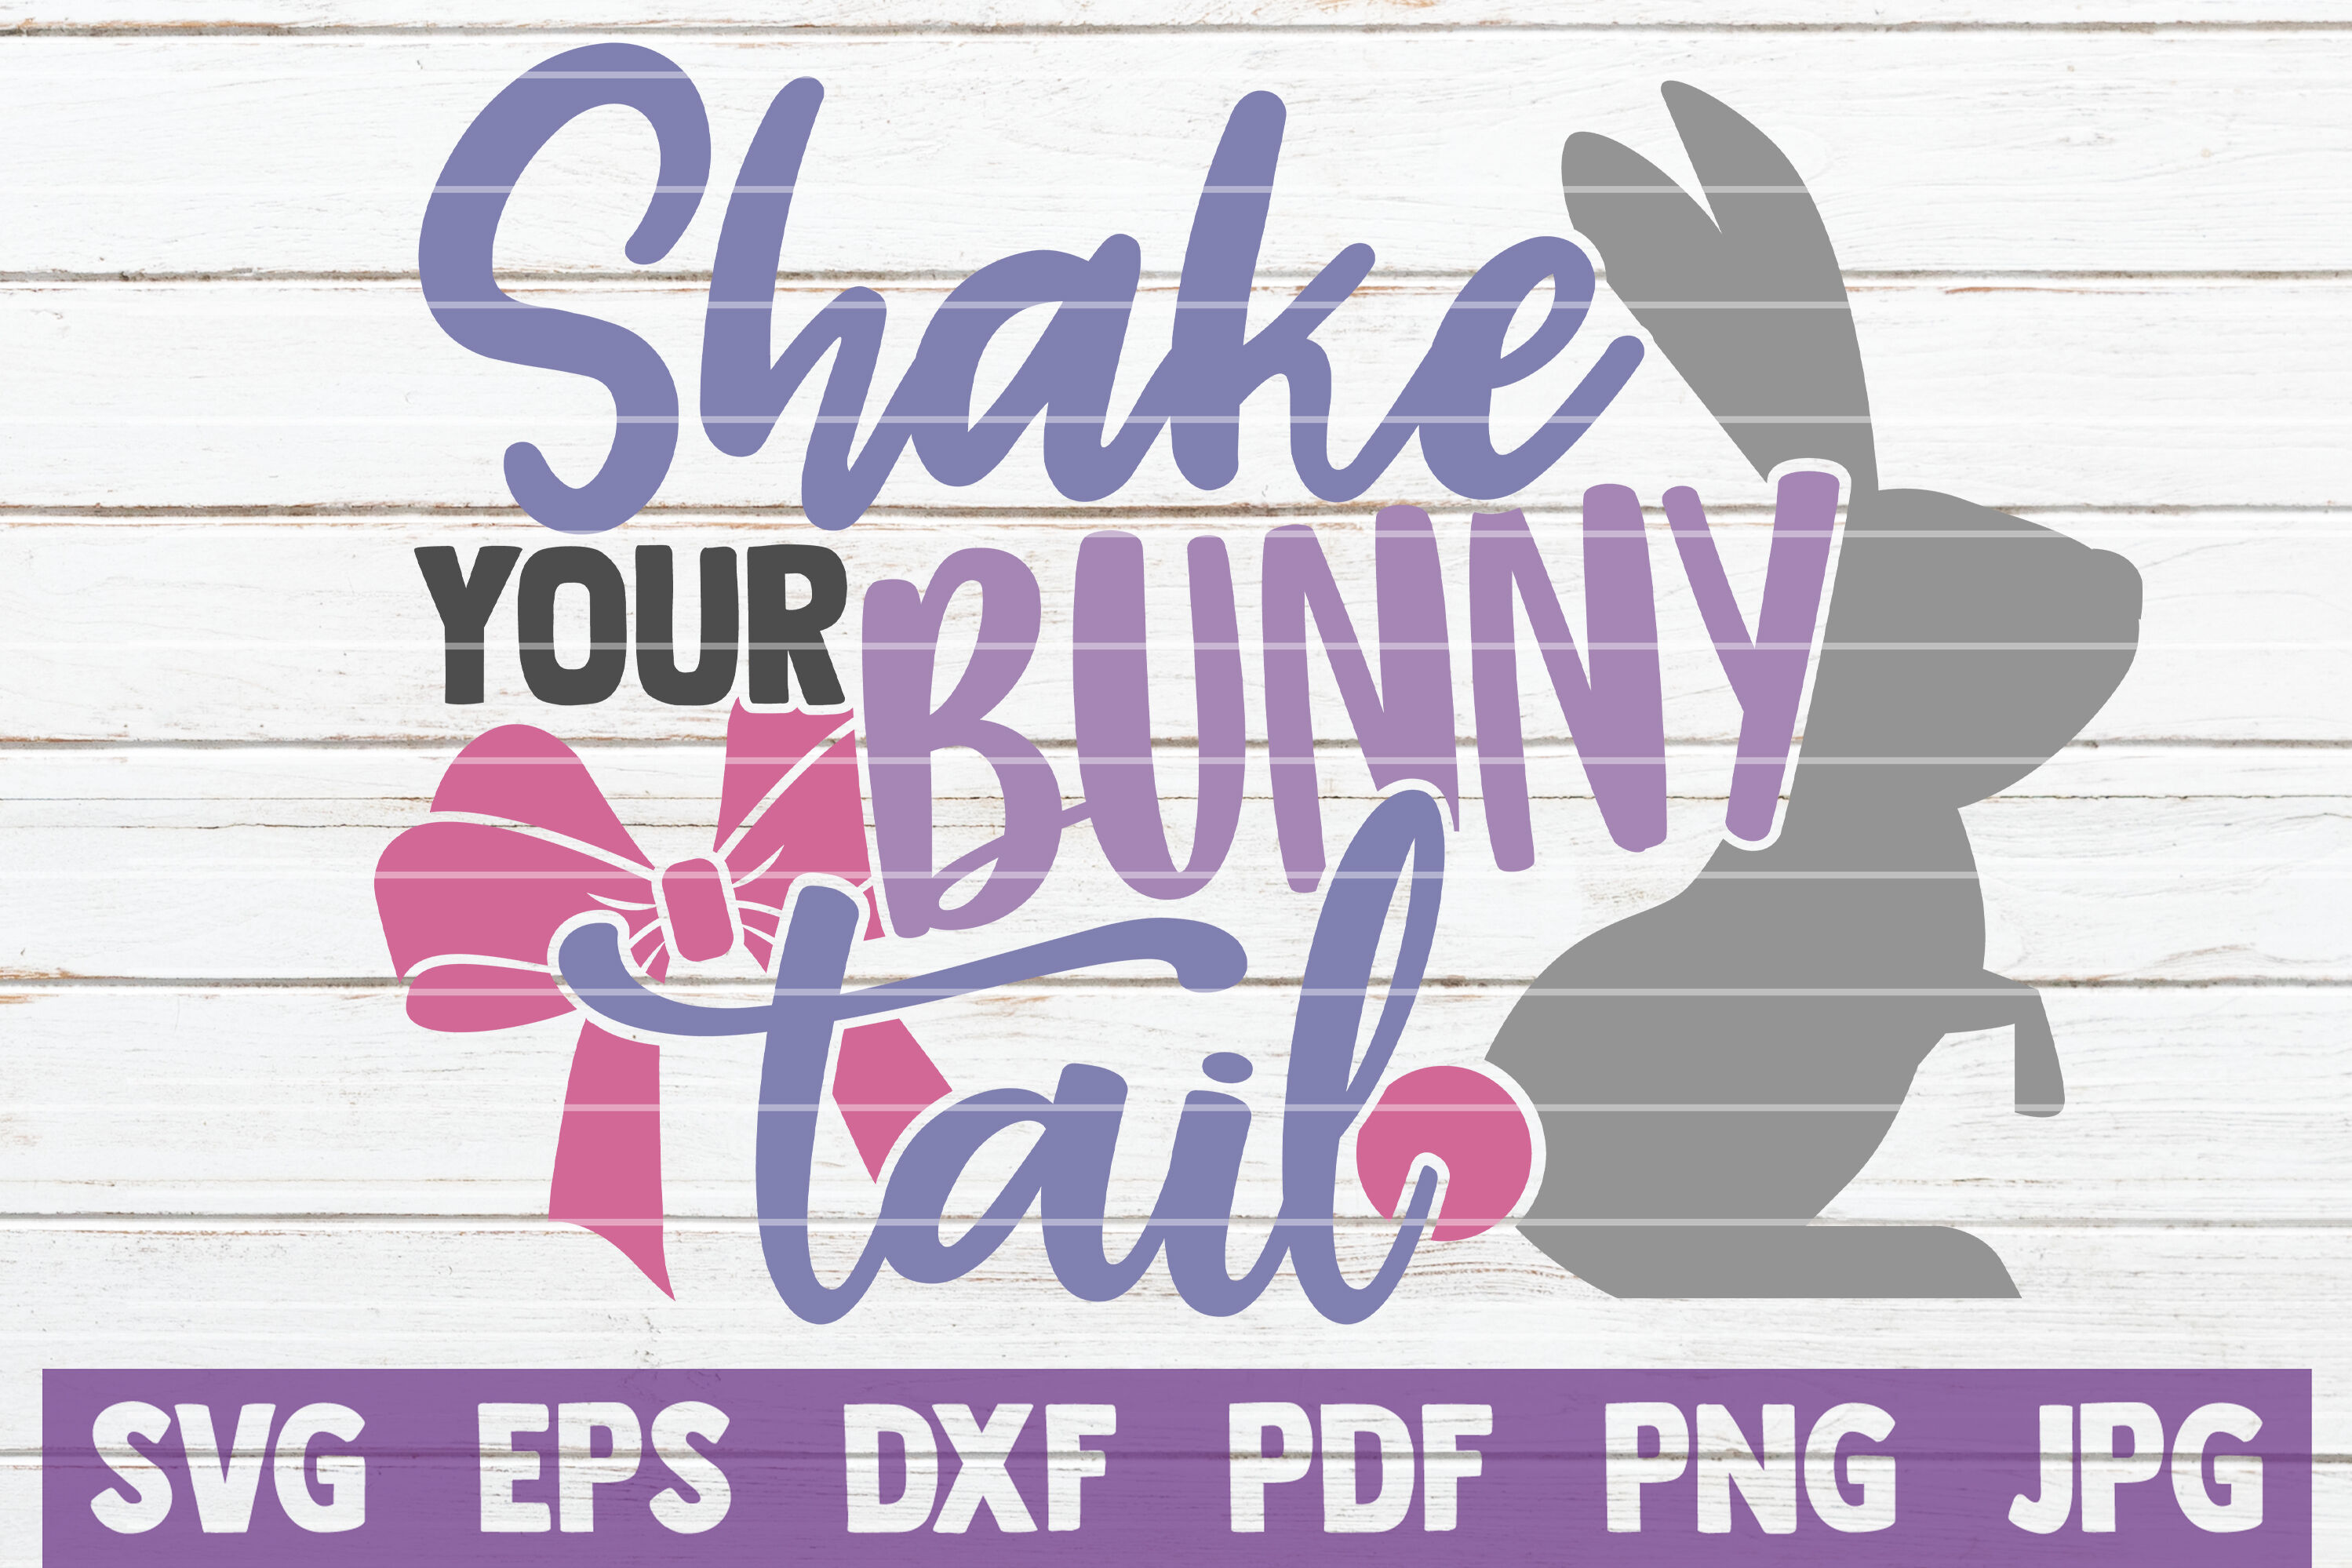 Download Shake Your Bunny Tail SVG Cut File By MintyMarshmallows ...